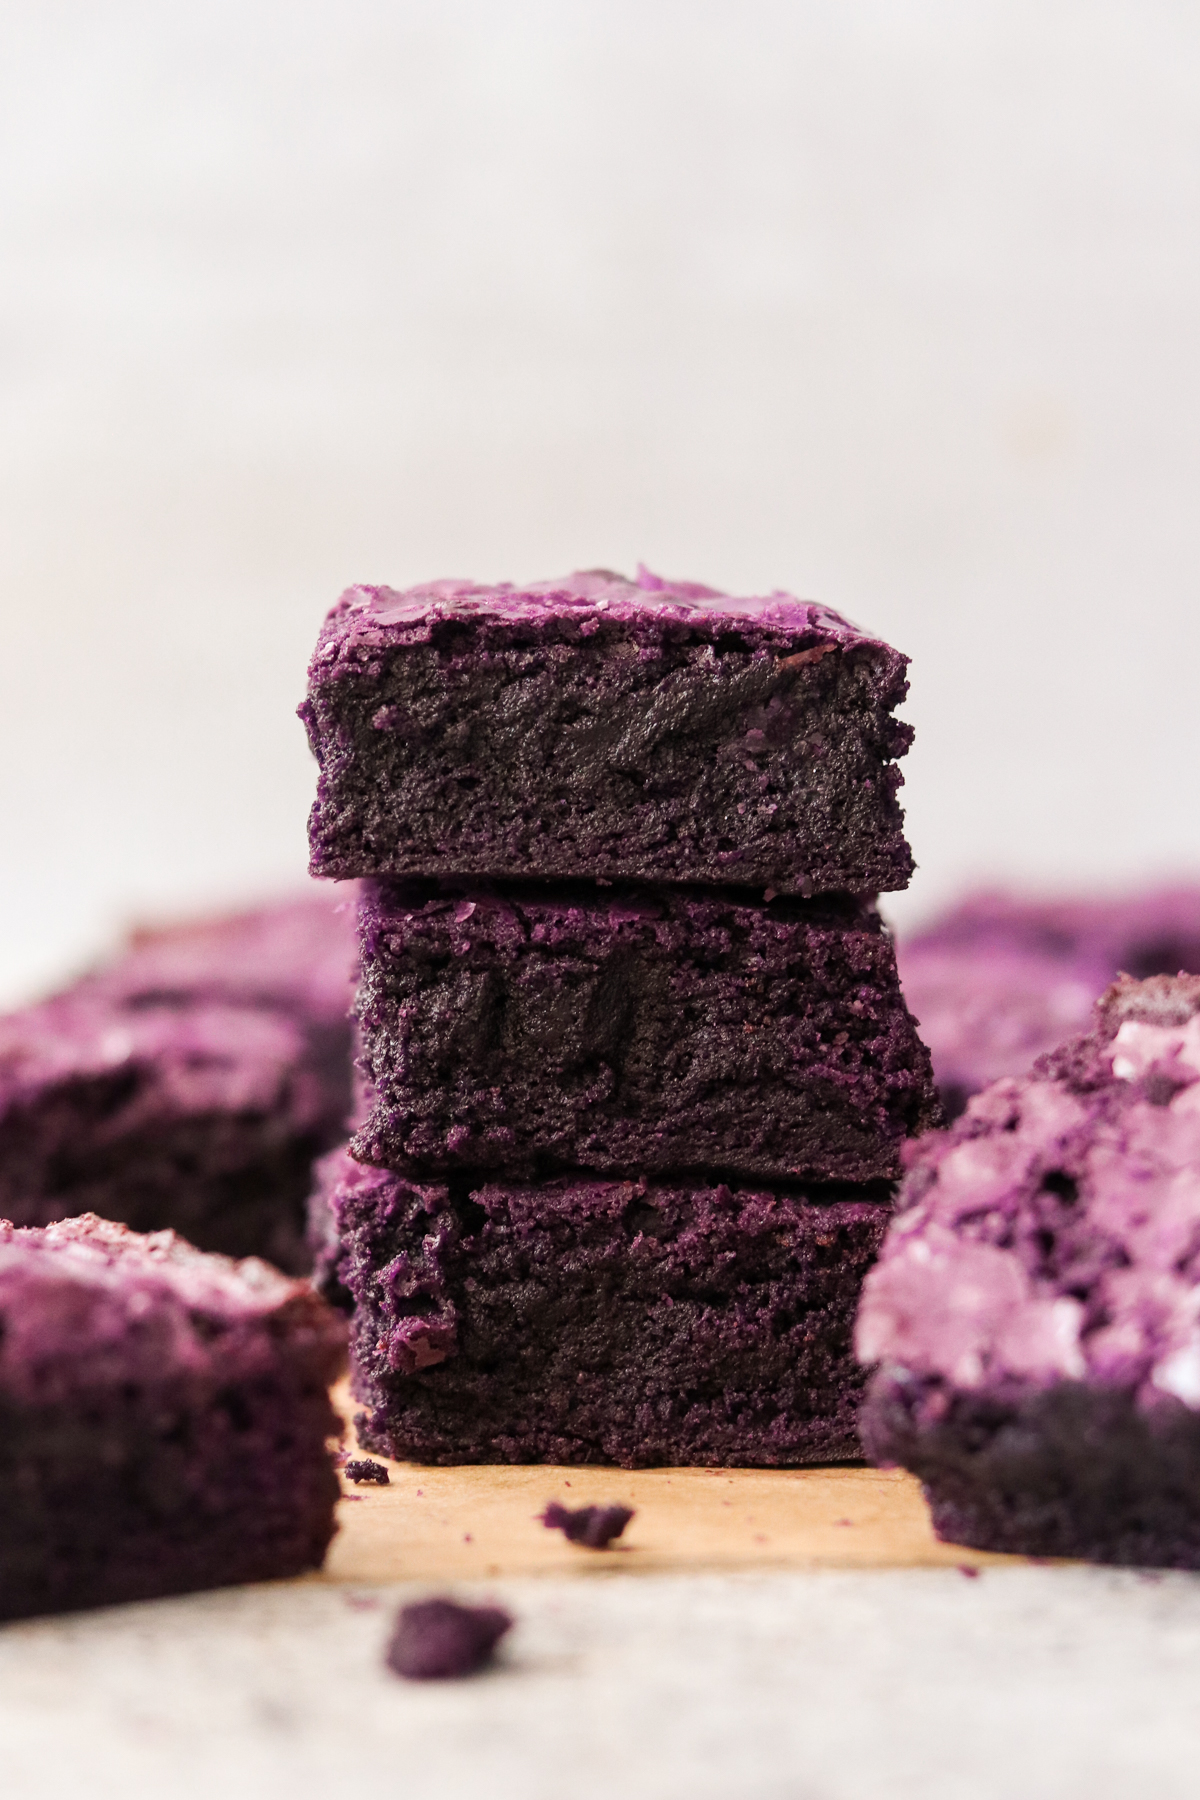 3 ube brownies stacked on top of each other